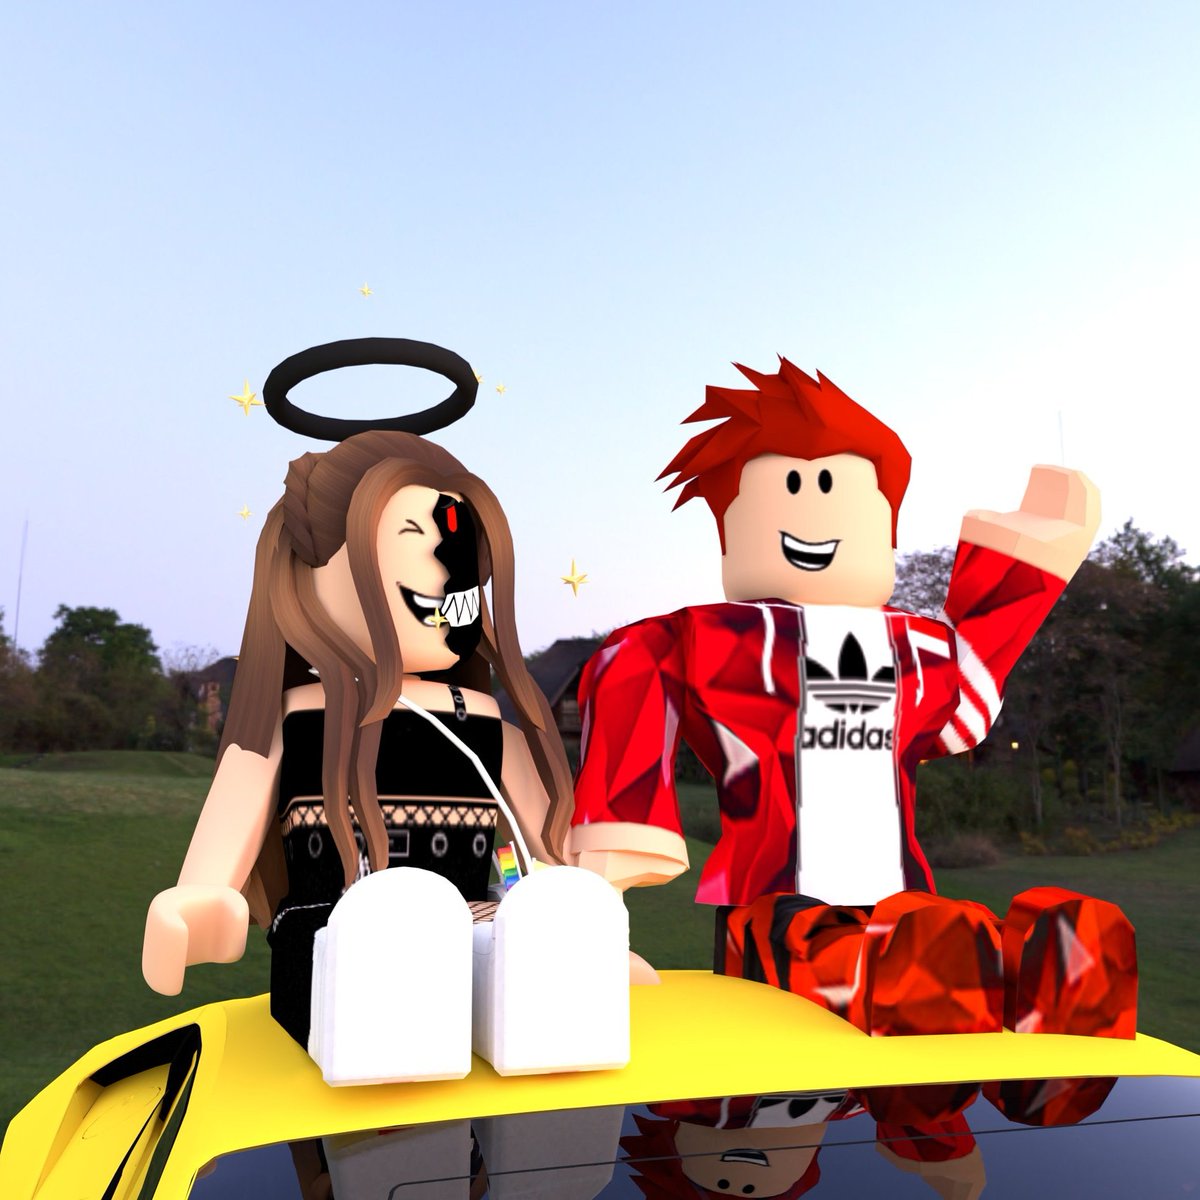 Regina On Twitter Hi Want A Bff Gfx Like These Comment Your Roblox User And Your Friend Or Best Friends Username I Might Make One Of You Https T Co Itx6g0yffq - summer aesthetic roblox girl gfx bff